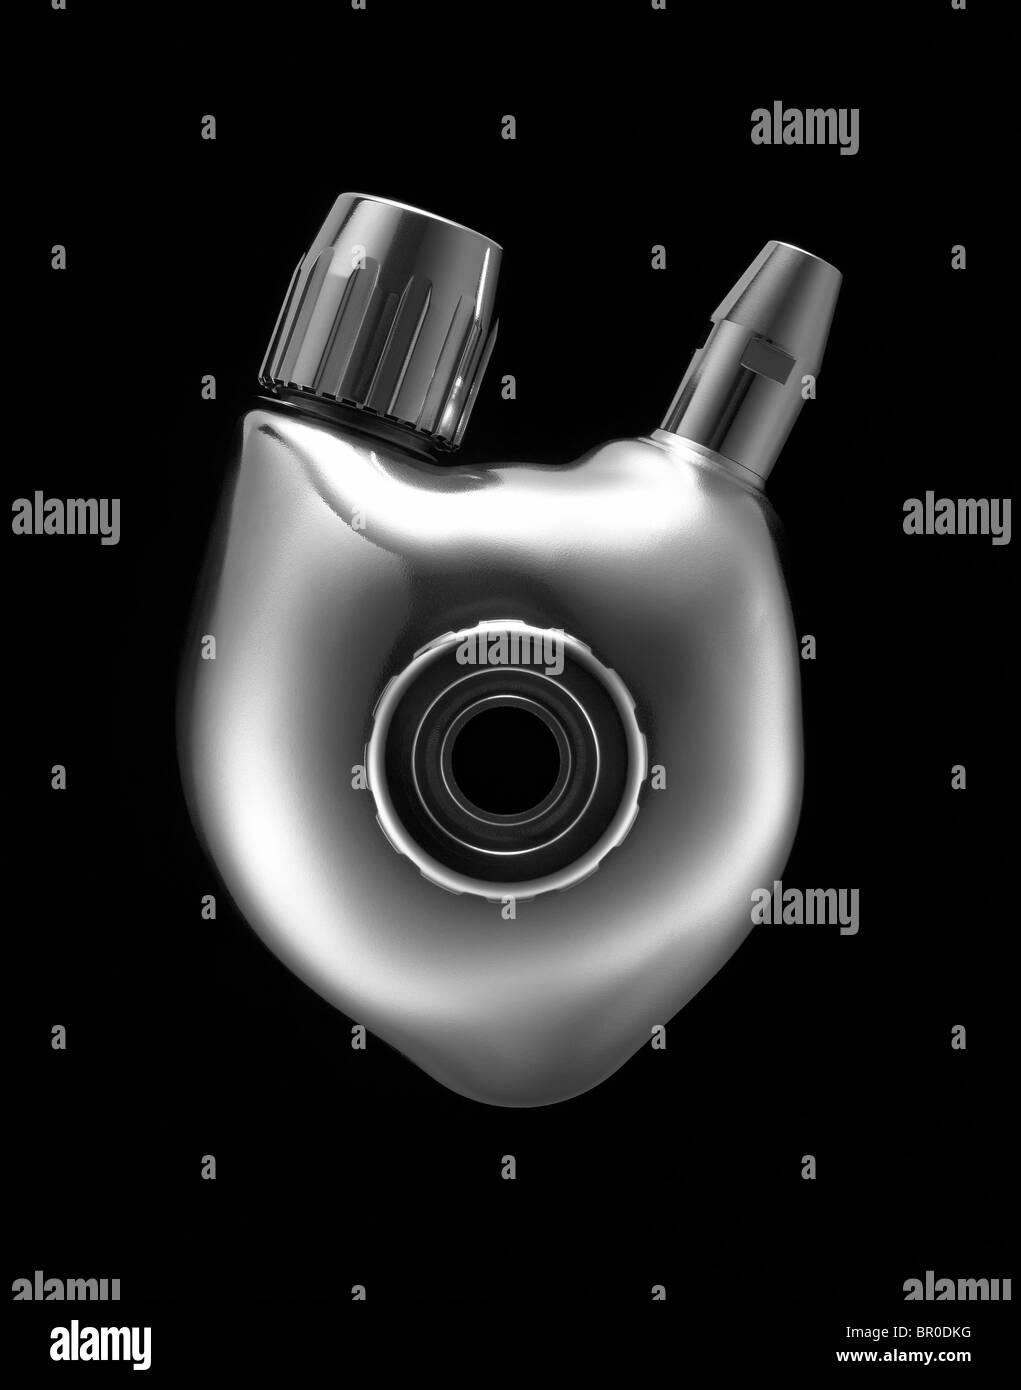 artificial heart on a black background Stock Photo